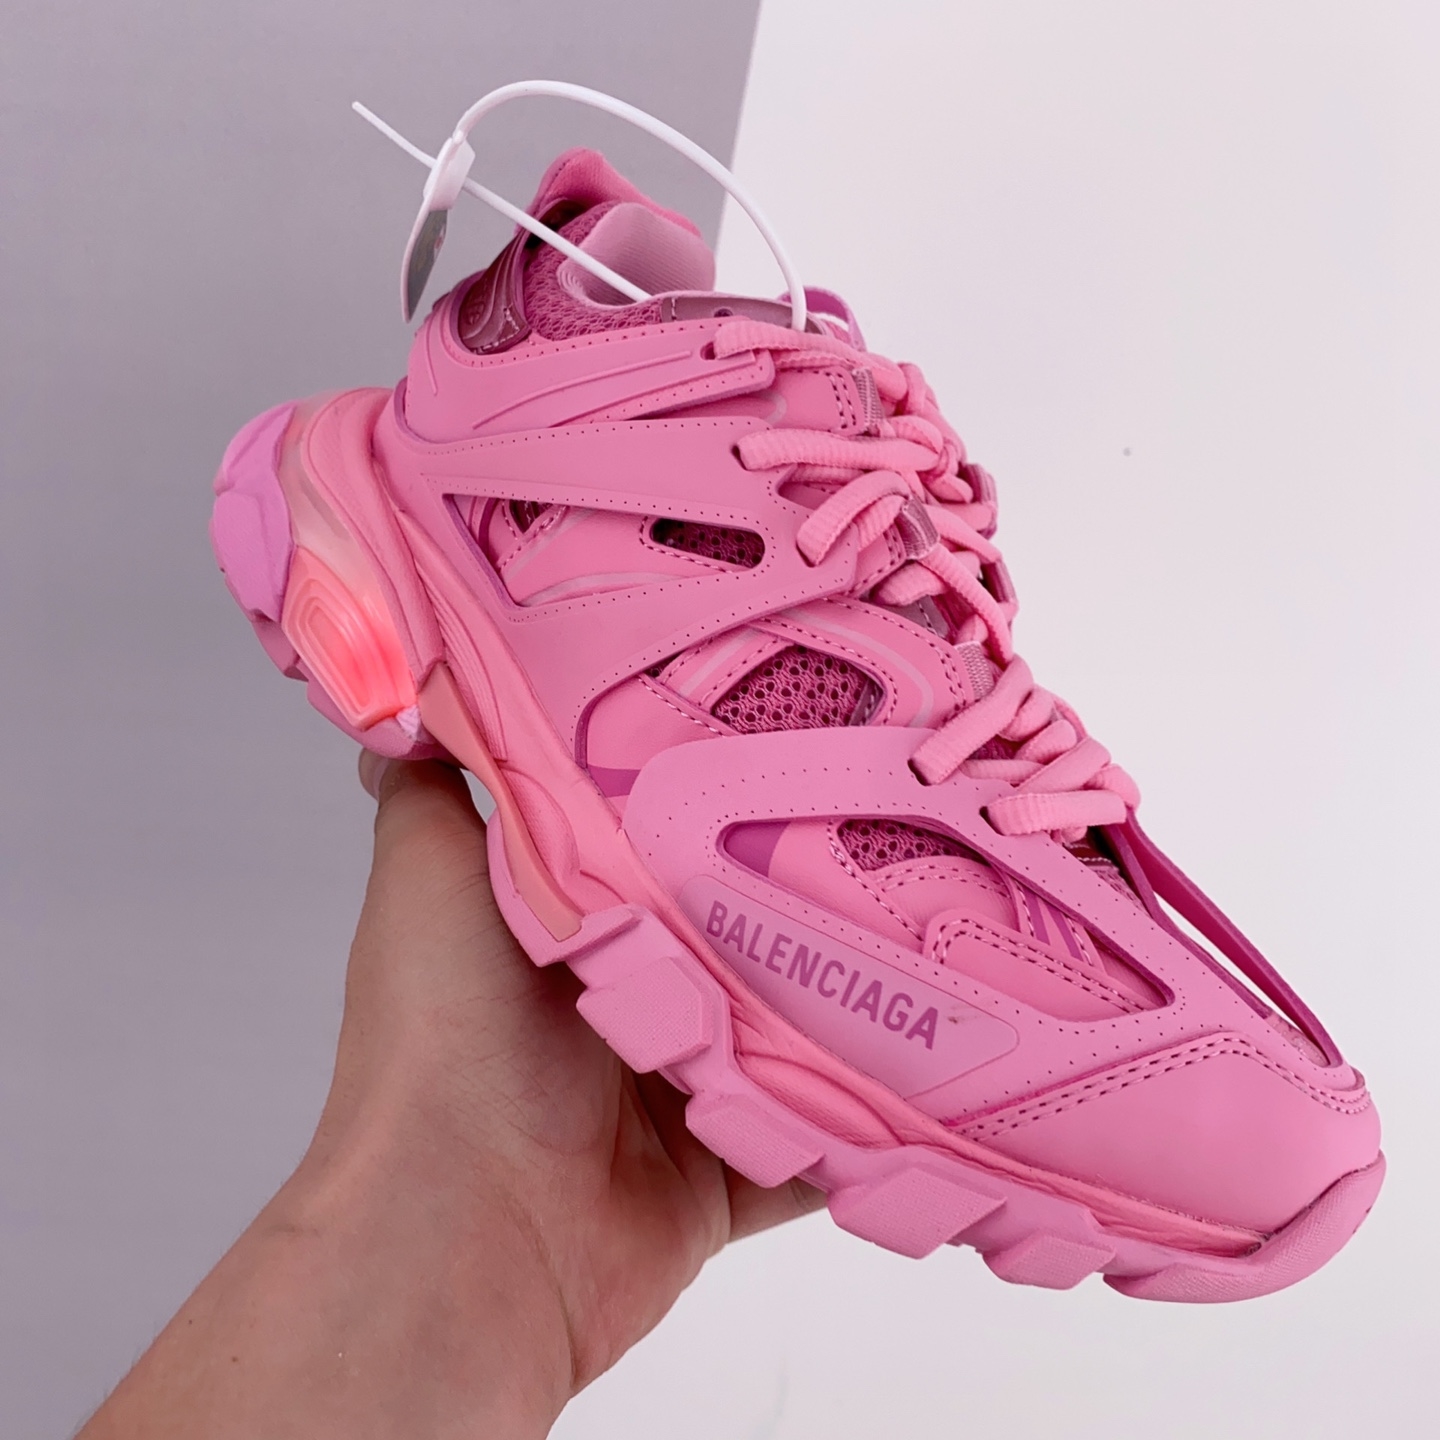 Balenciaga Track Lace-up Sneakers Pink 542436W2LA15842 - Stylish and Trendy Footwear